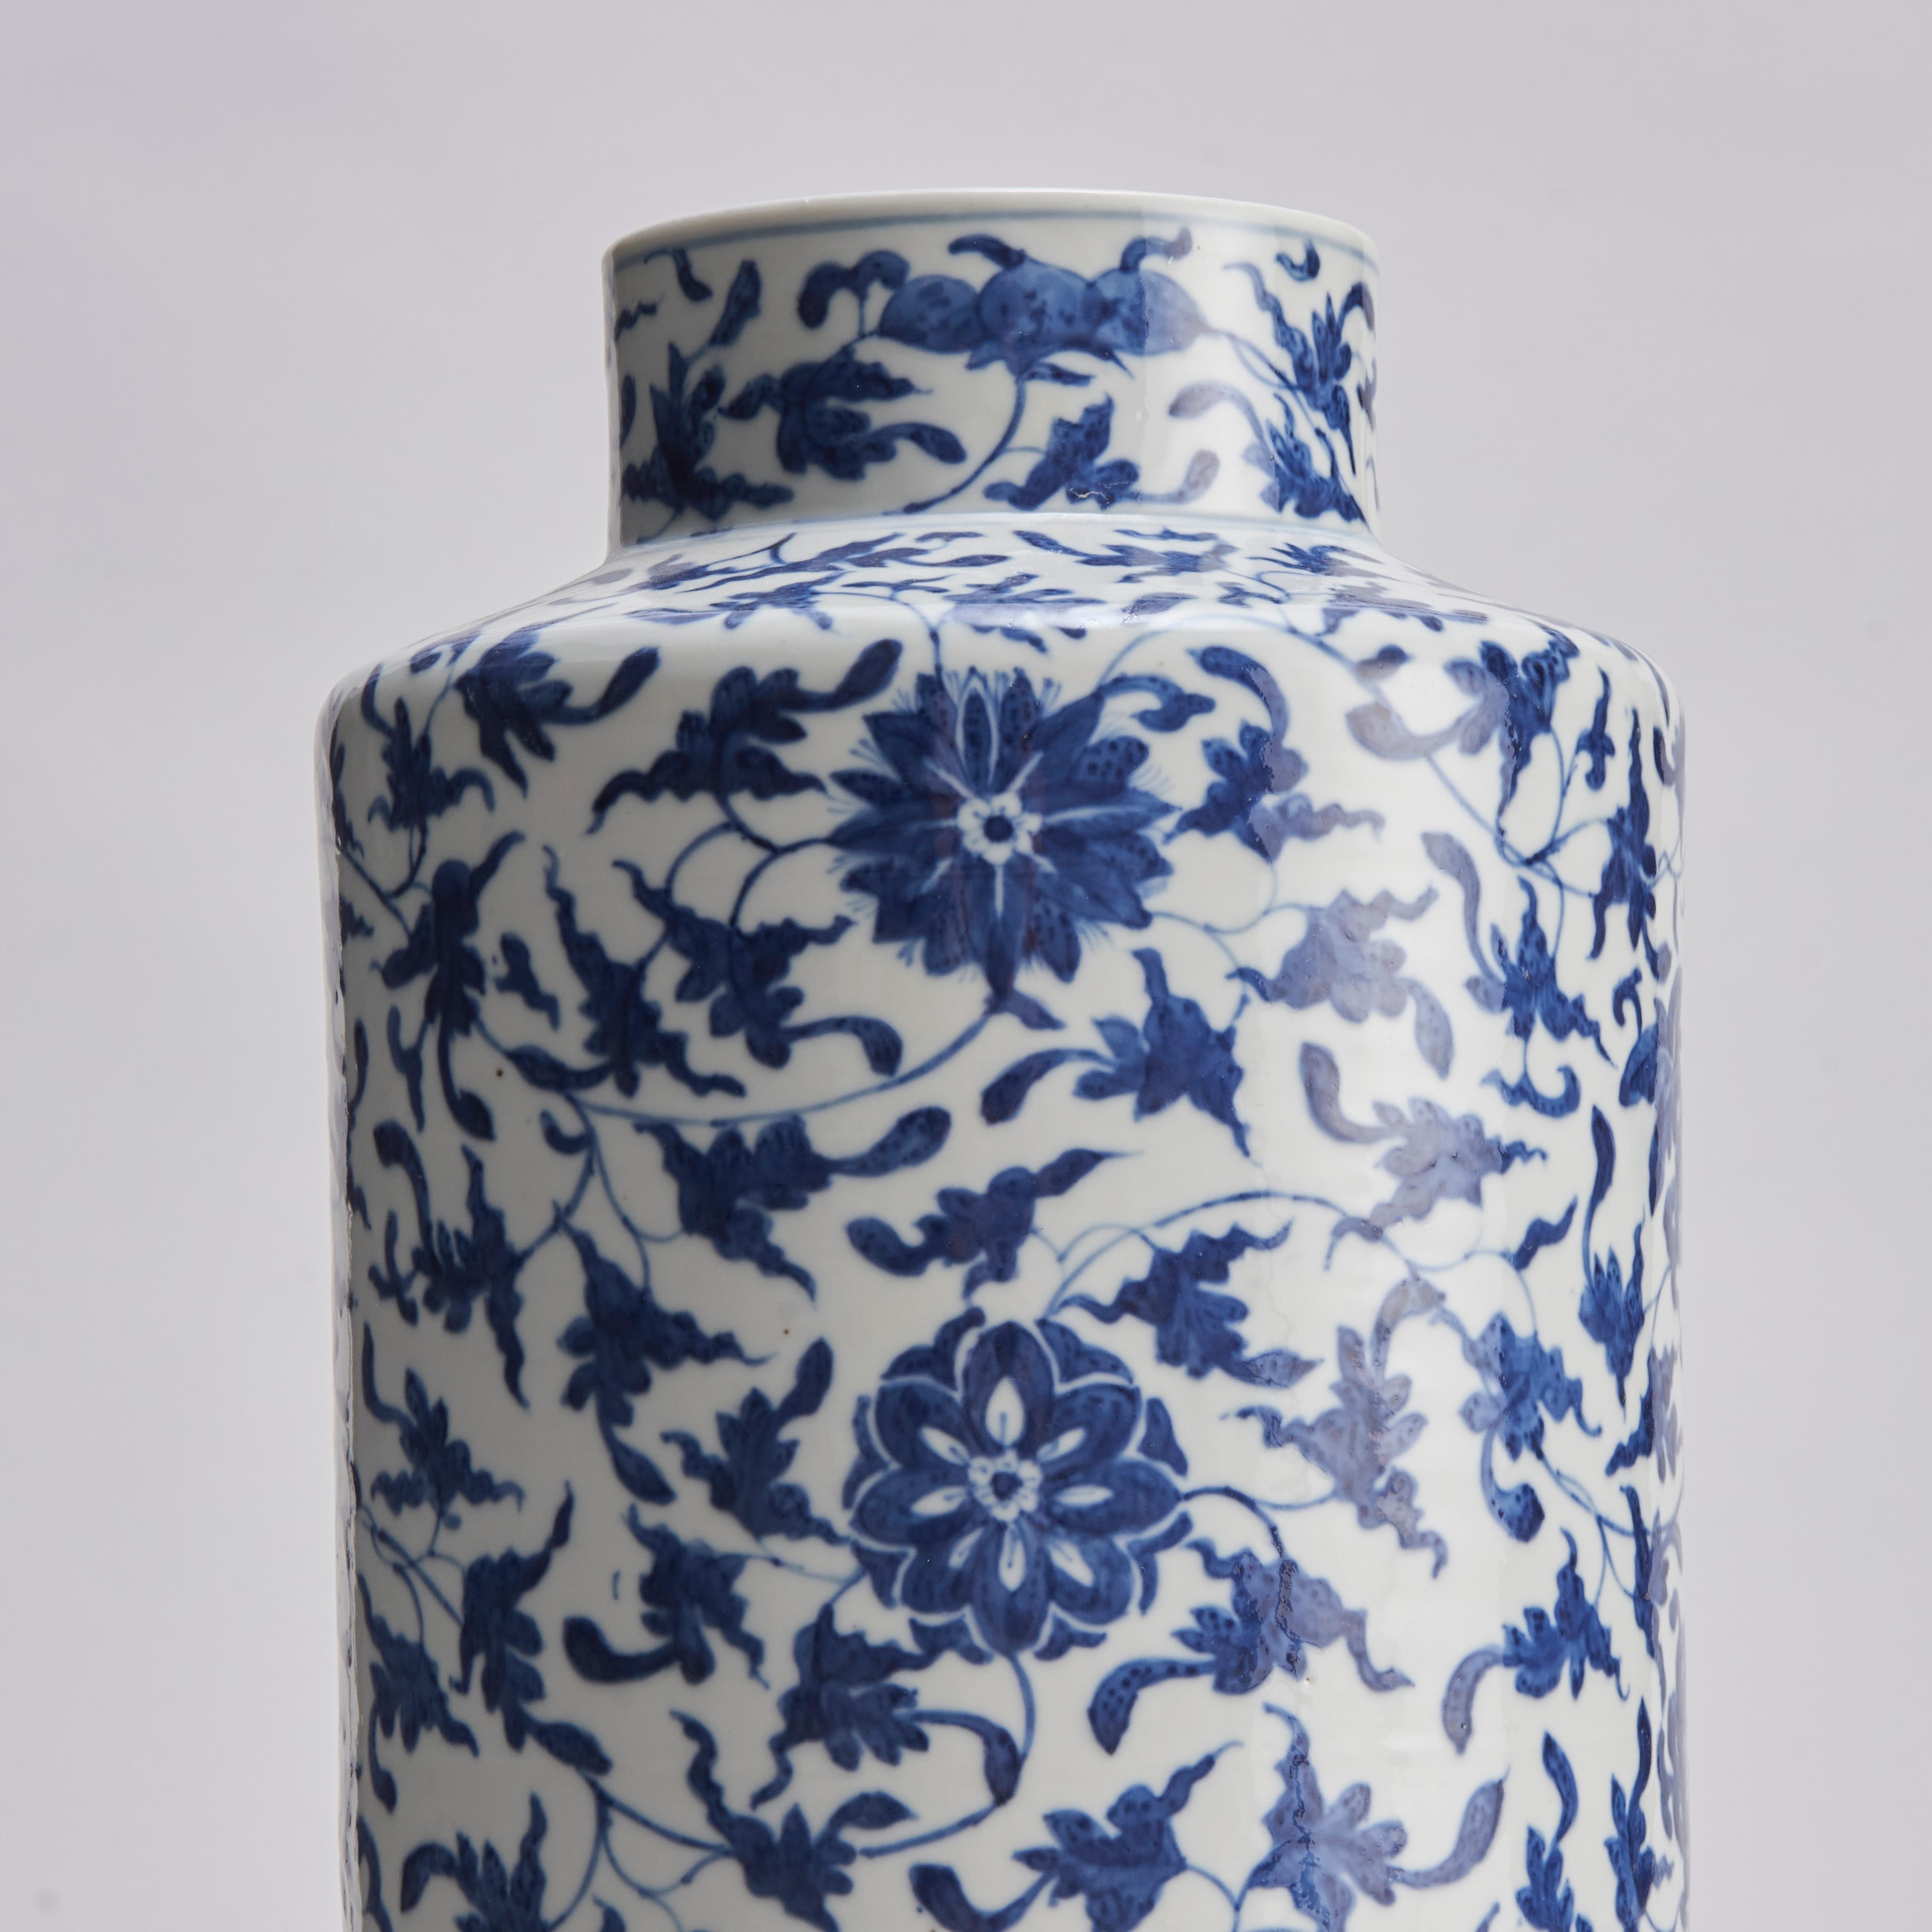 Porcelain An elegant, 19th Century Chinese blue and white porcelain sleeve (Tongping) vase For Sale